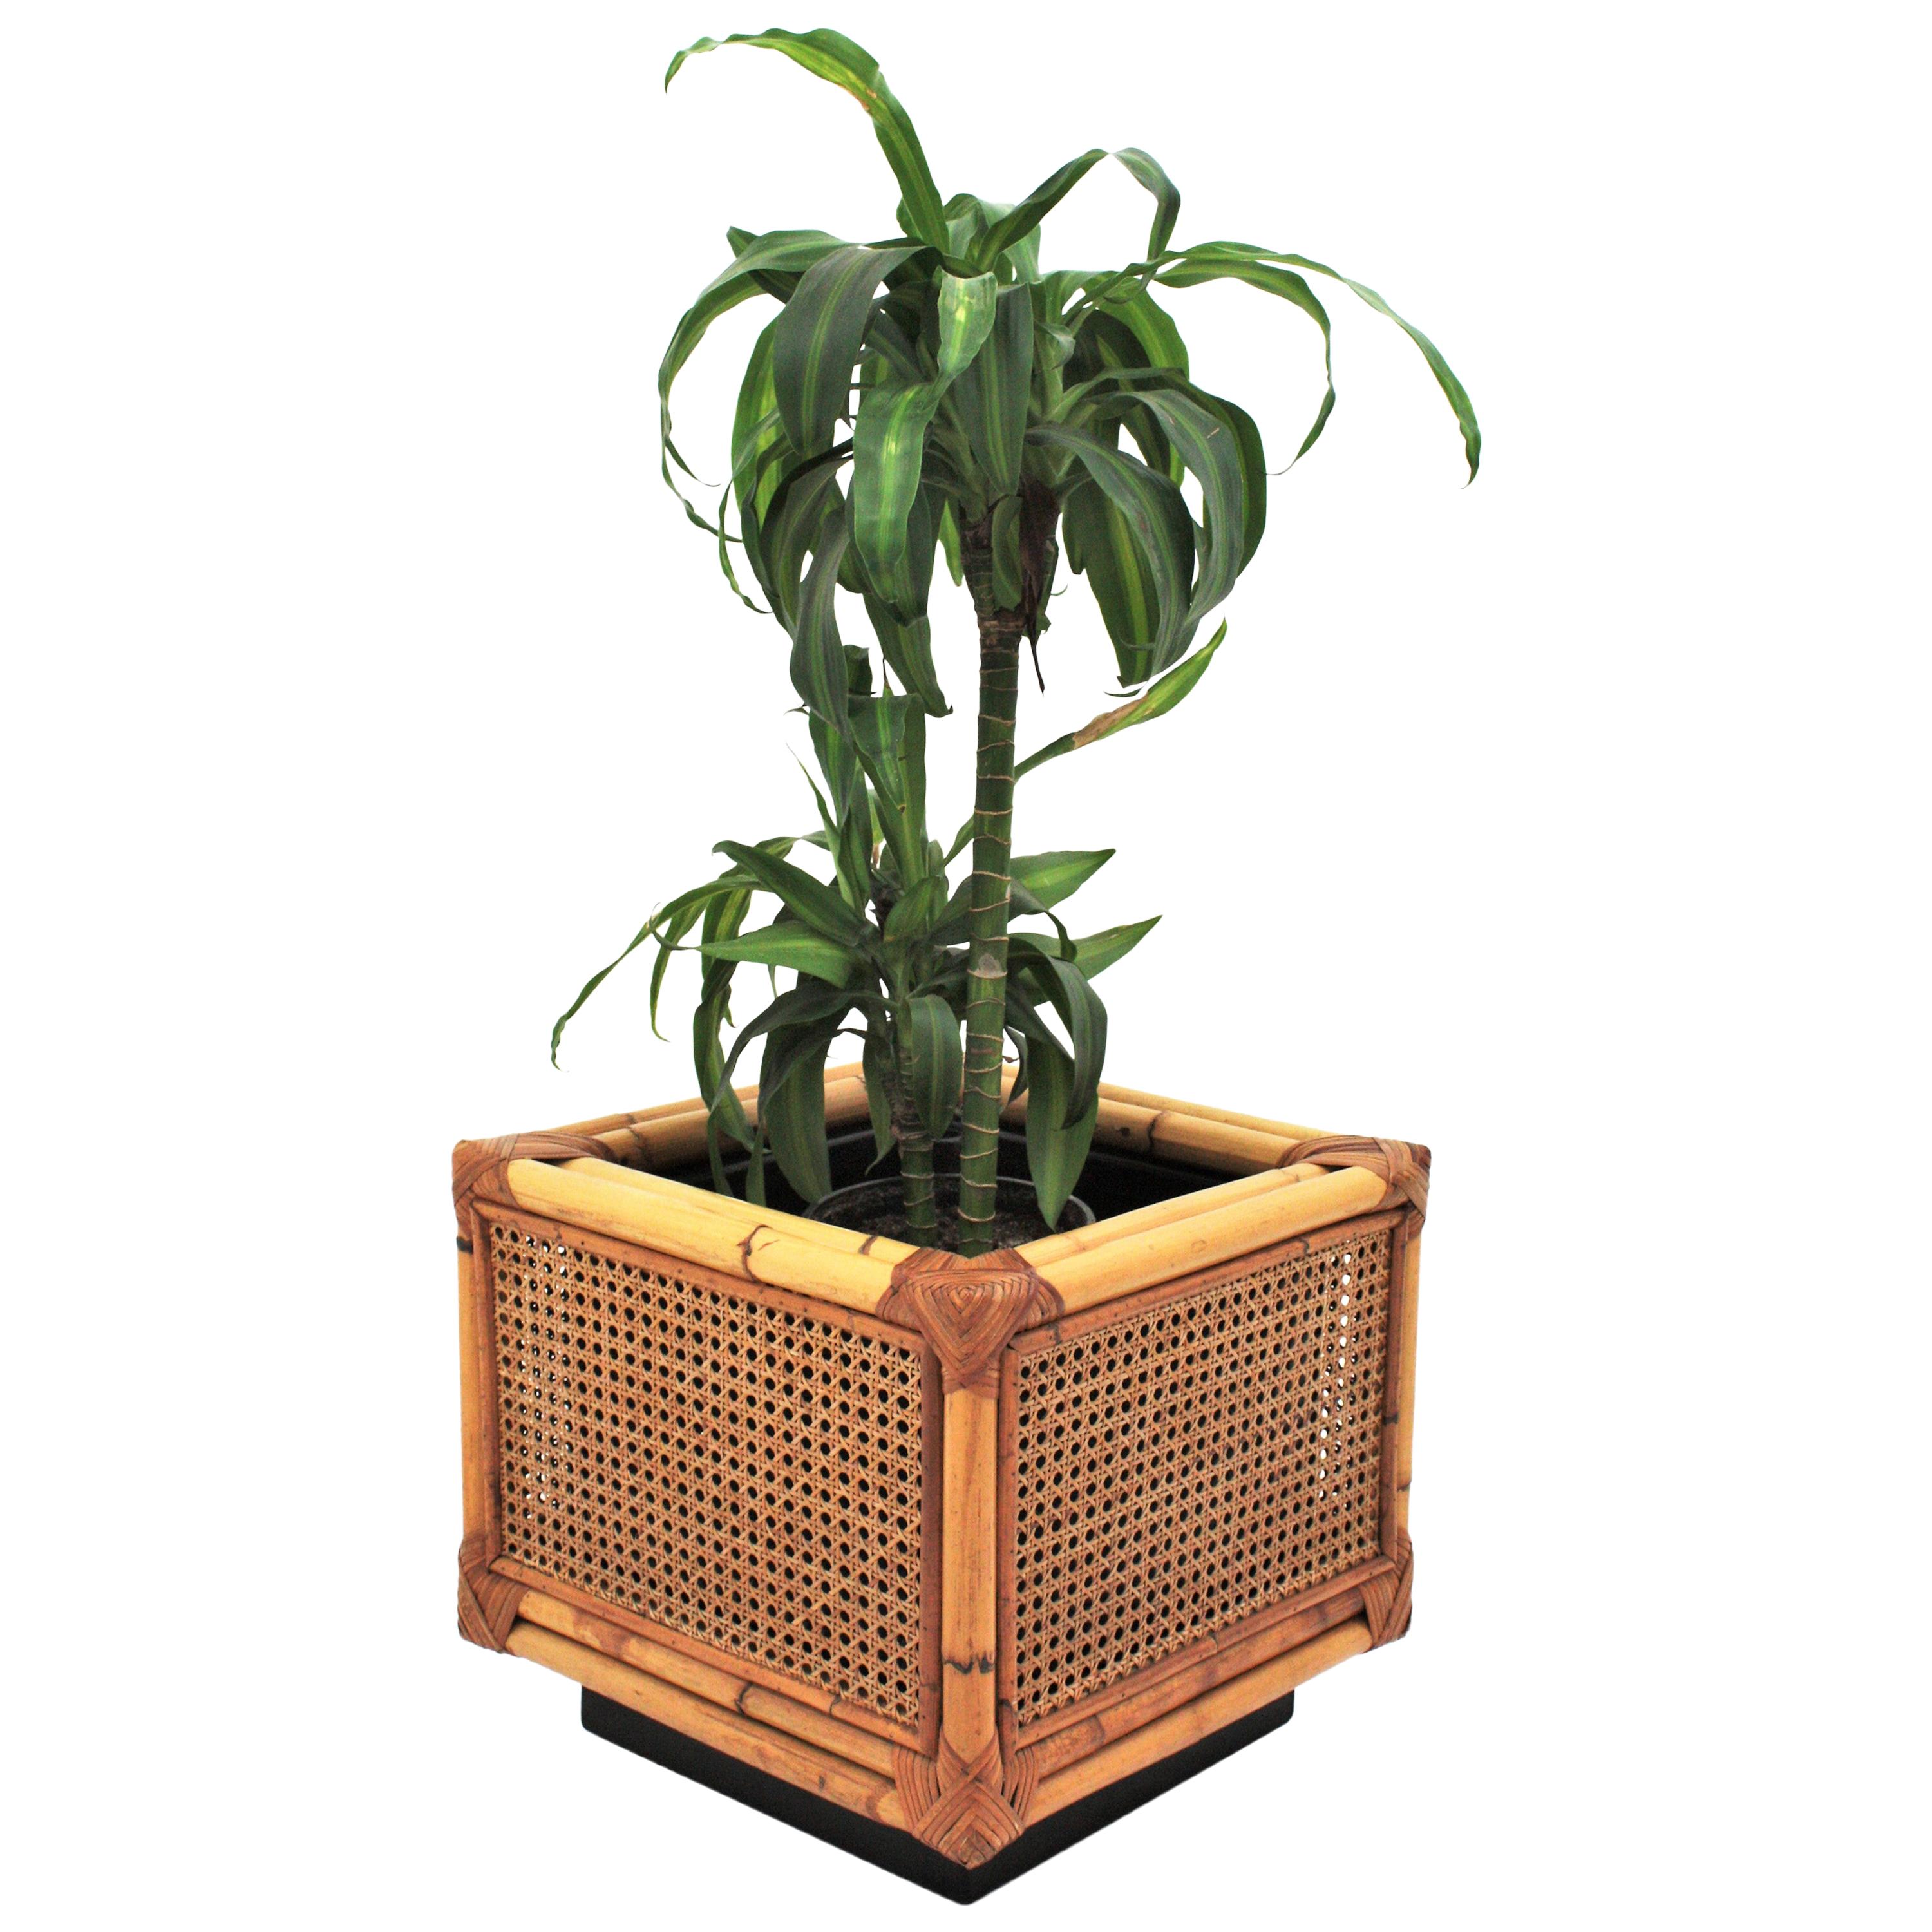 Elegant mid-20th century wicker weave and bamboo planter in the style of Christian Dior. Spain, 1970s.
This rattan/ wicker and bamboo squared planter dates from the 1970s. The structure is made of bamboo, featuring cane weaving panels as sides and